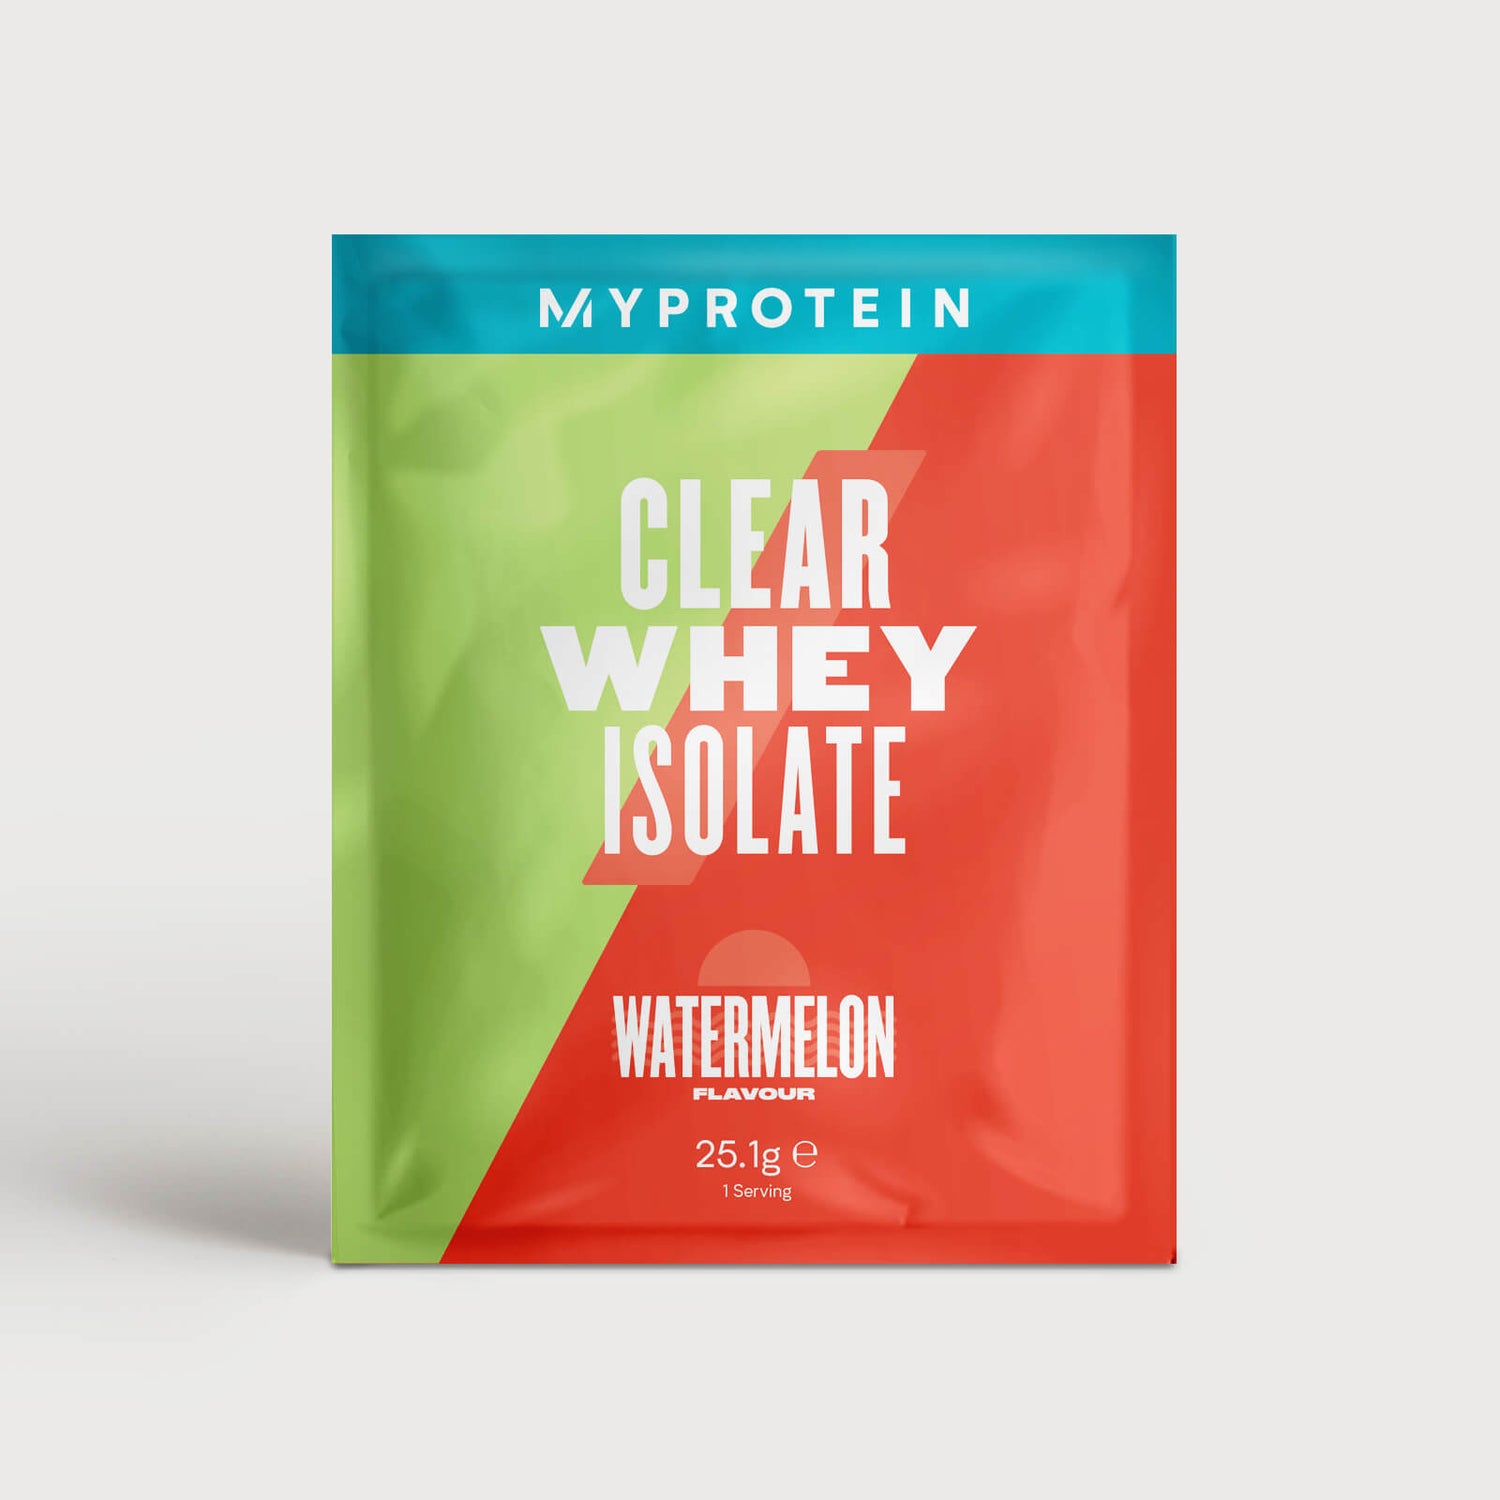 Myprotein Clear Whey Isolate (Sample) - 1servings - Wassermelone